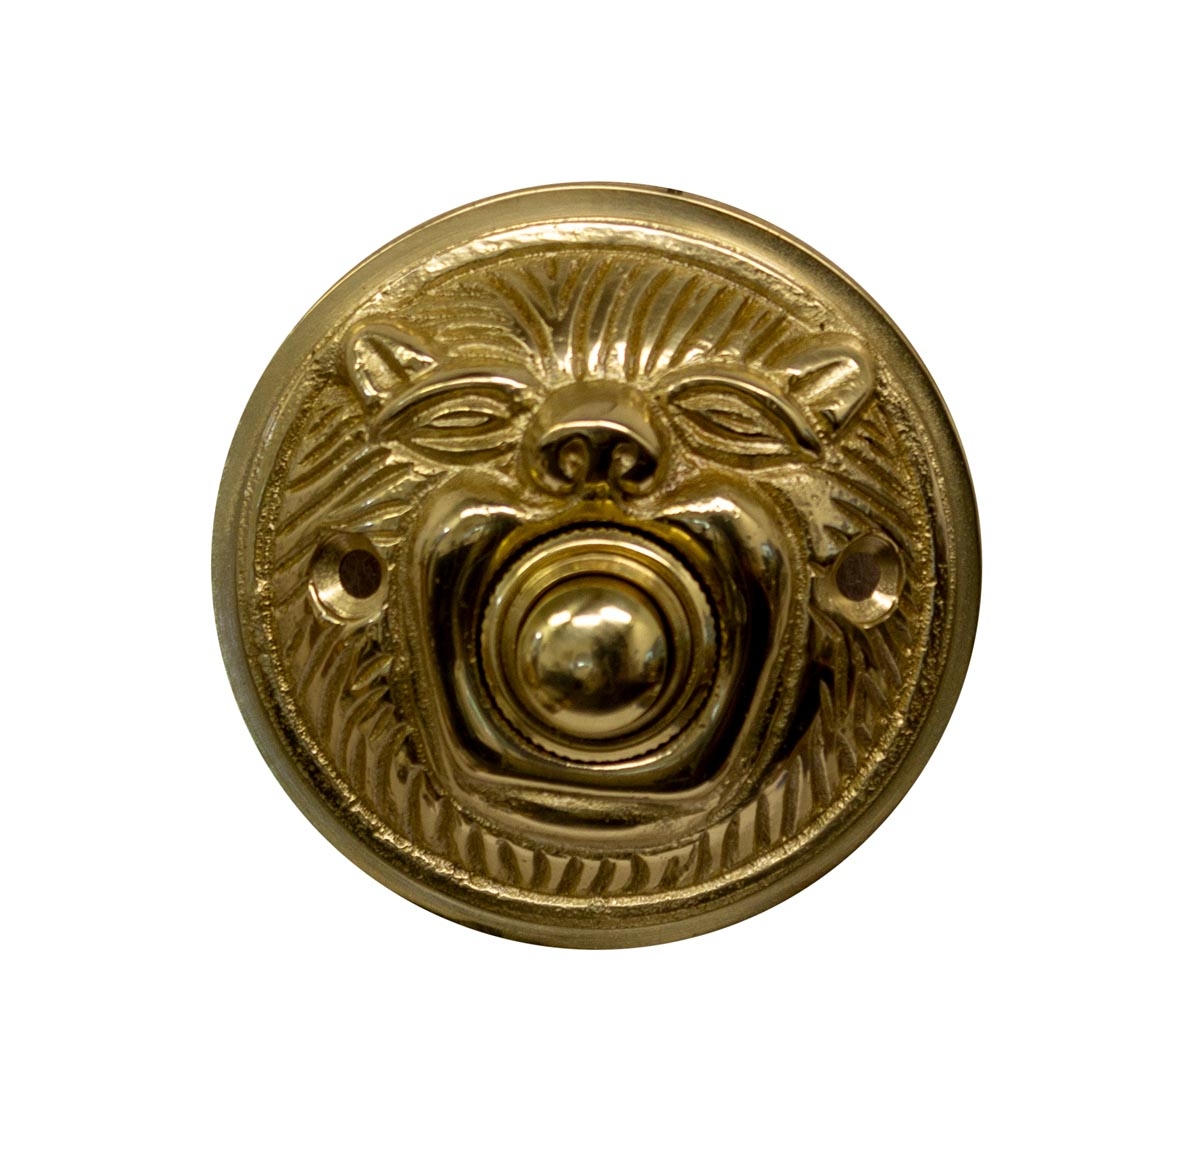 Whimsical Animal Face Polished Brass Doorbell Button